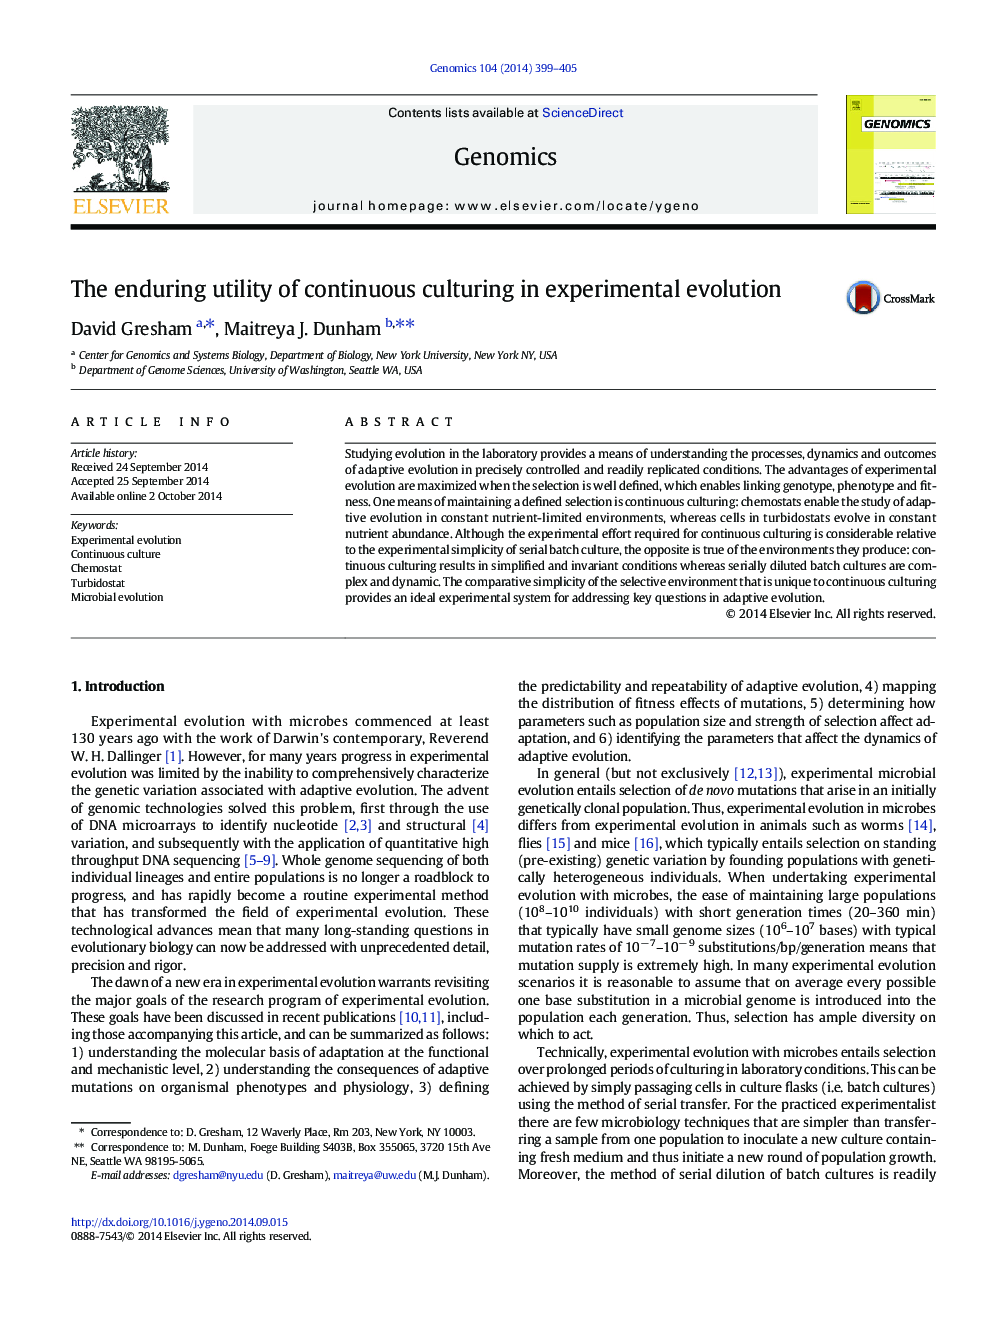 The enduring utility of continuous culturing in experimental evolution